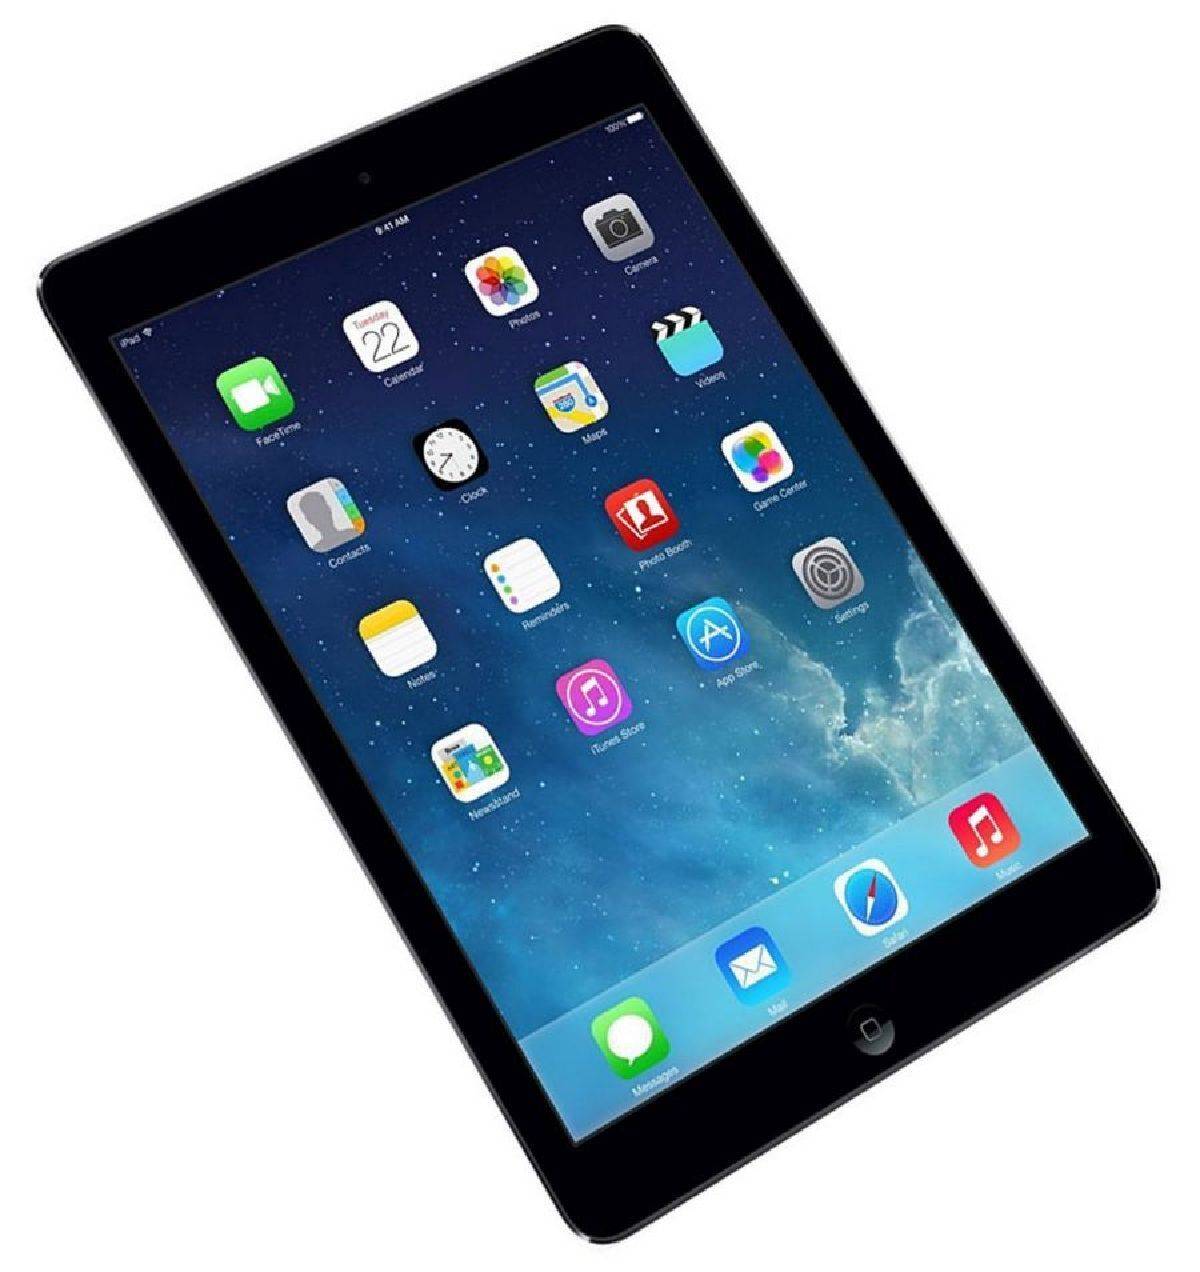 Apple iPad Air 1 Wi-Fi + Cellular, AT&T or T-Mobile | 16 GB, Black